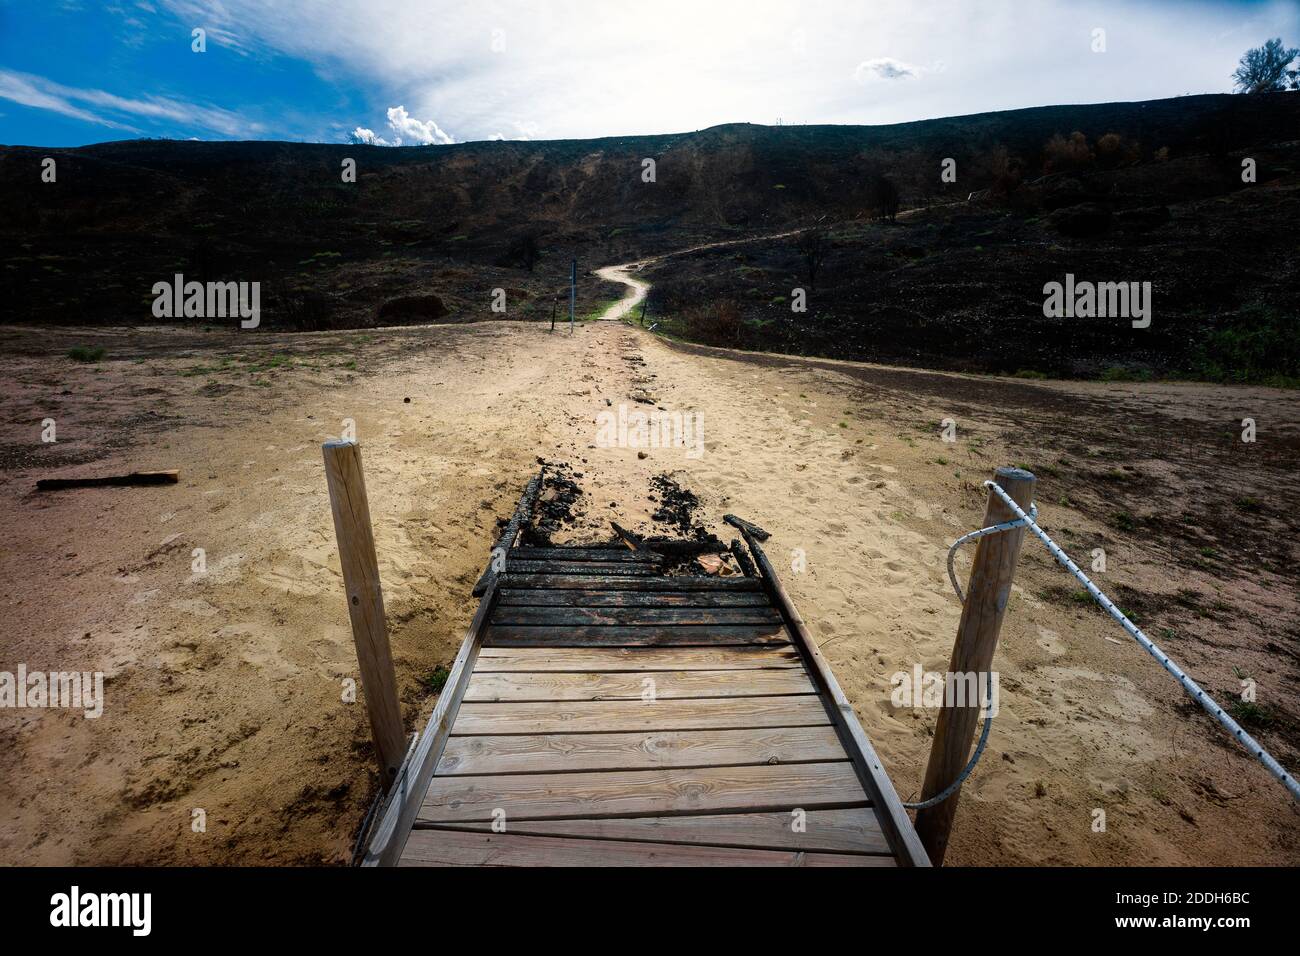 Punta Penne nature reserve, Vasto, Abruzzo, Italy: the wooden platform and the hill of the reserve after the fire of August 2020 Stock Photo